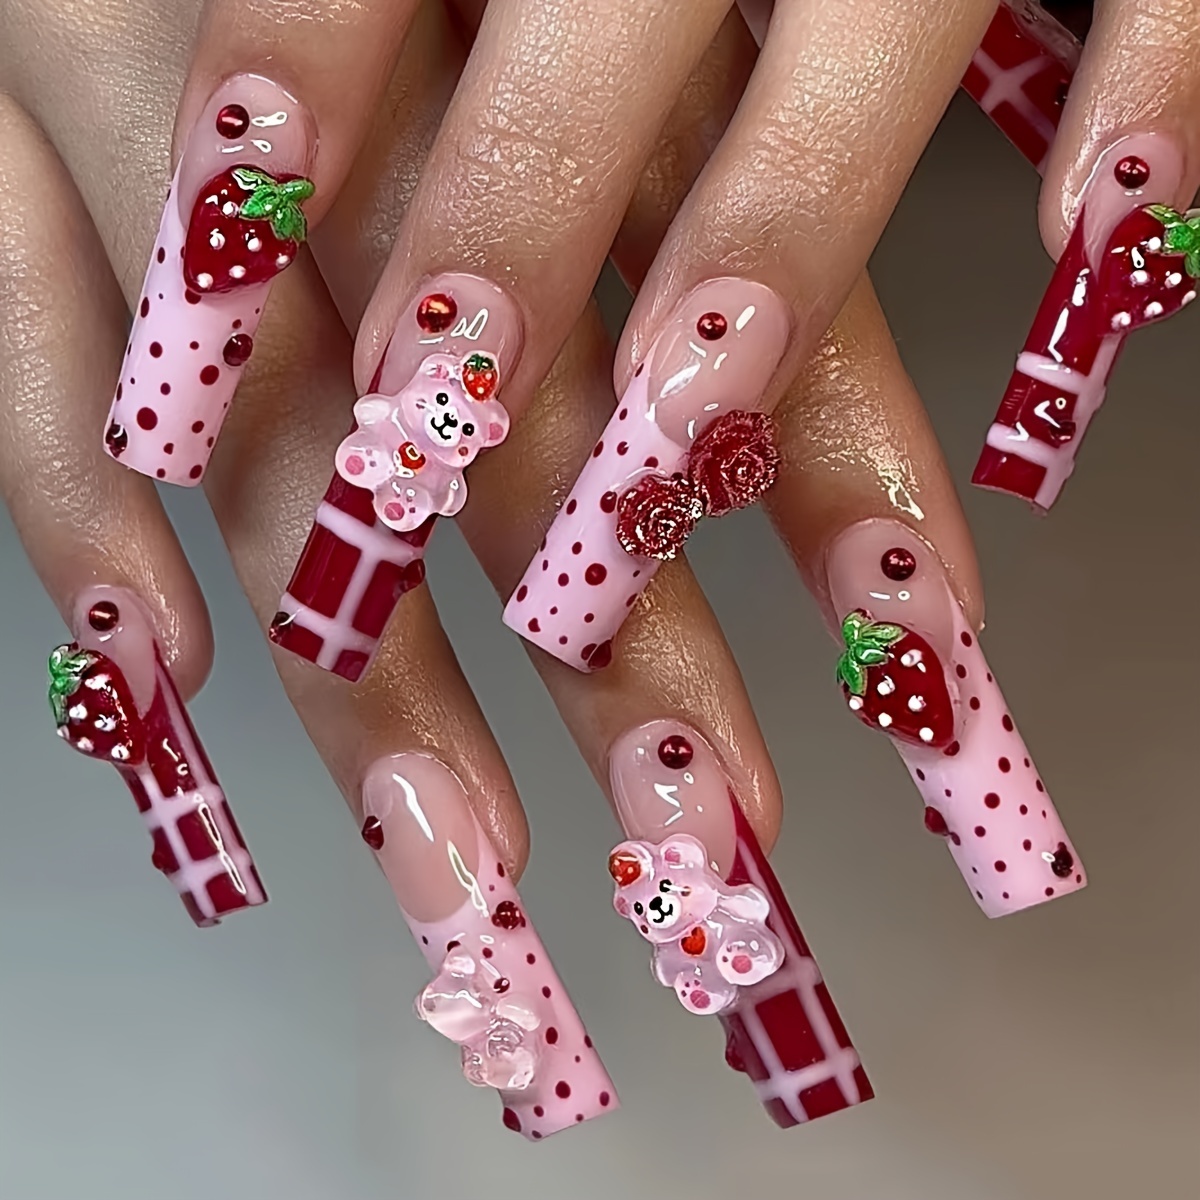 

24pcs Long Square Wearable Nail Set, Spring/summer 3d Milky Strawberry & Bear Design With Polka Dots & Stripes, Red Velvet Rose Accent, Includes 1 Jelly Glue & 1 Nail File